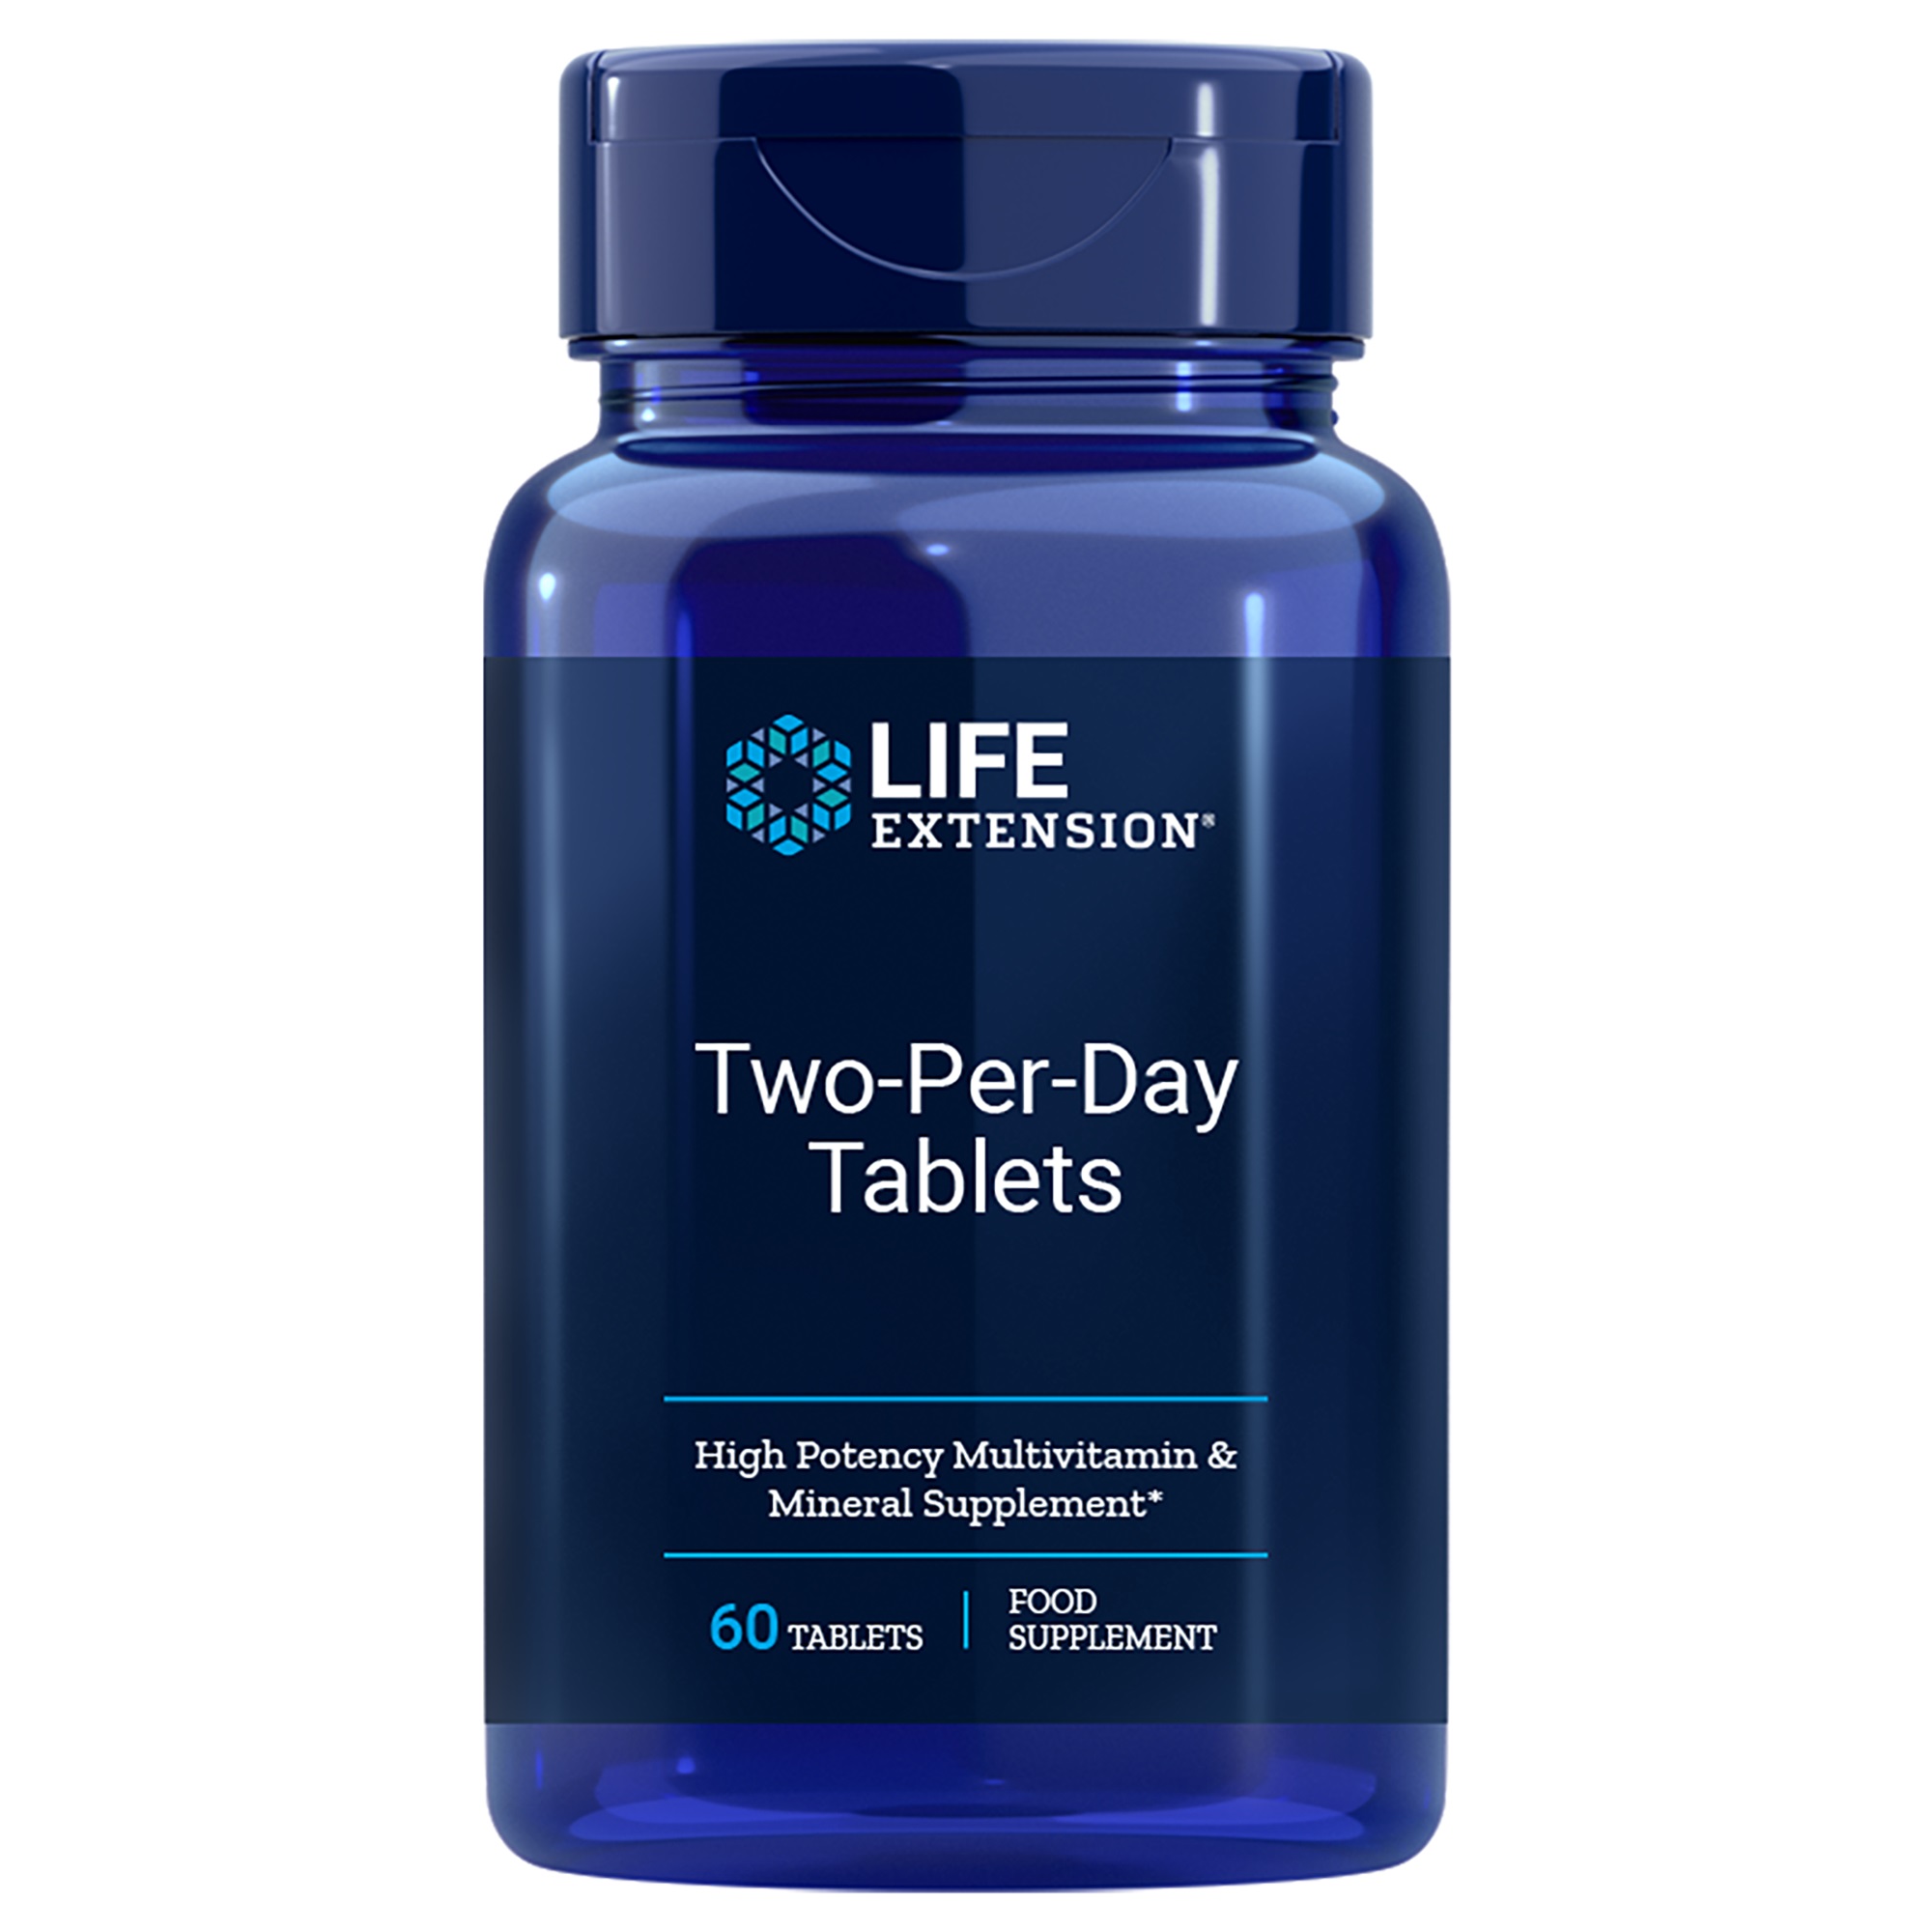 LifeExtension Two-Per-Day Tablets